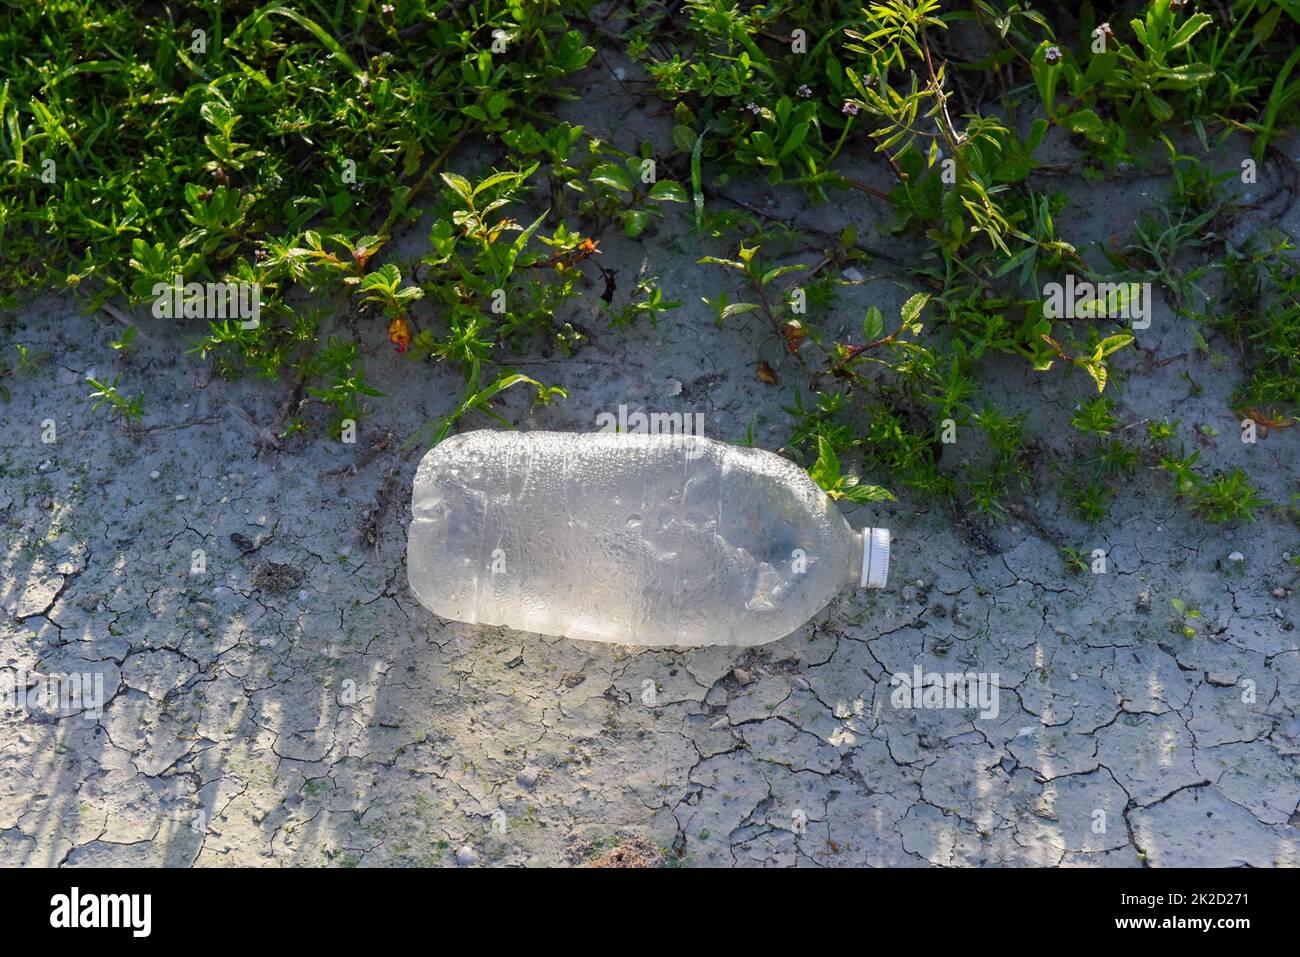 Plastic bottle thrown on cracked earth from heat Stock Photo